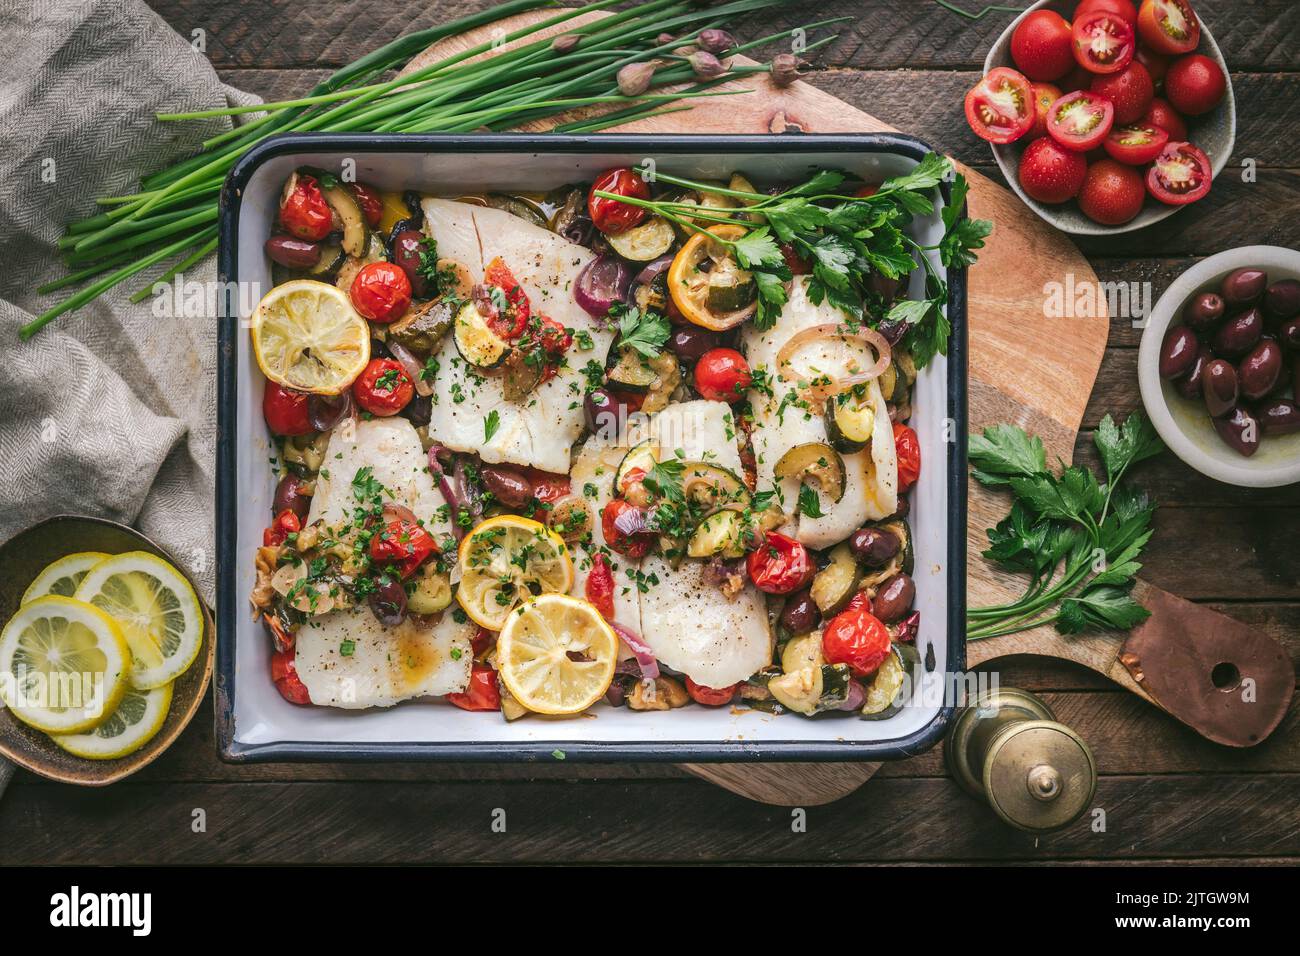 Roasted Fish Filets in enamel baking dish with tomatoes, courgette, olives and lemon Stock Photo